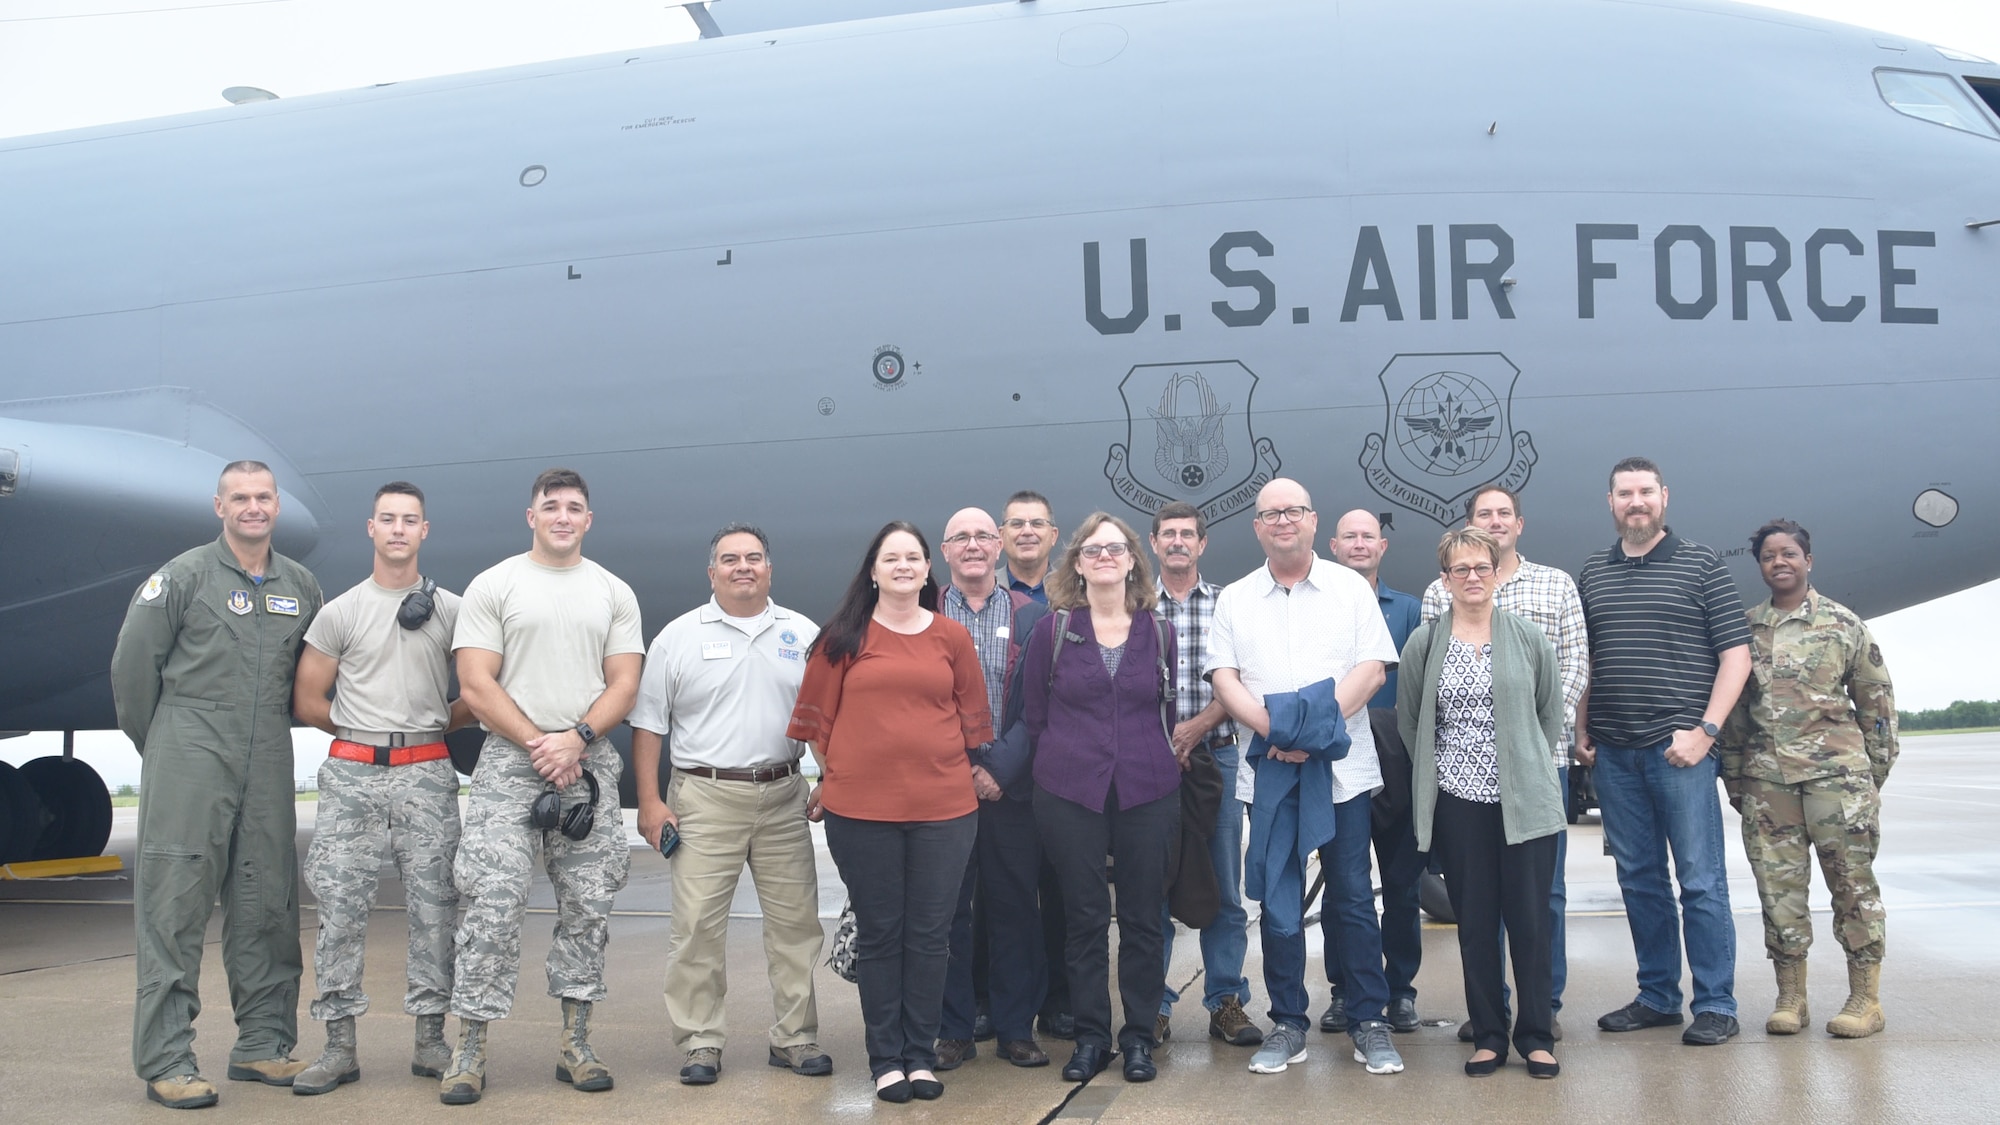 Ten civilian employers of 931st Air Refueling Wing Airmen pose for a photo before boarding a KC-135 Stratotanker during a "Bosslift" sponsored by the local Employer Support of the Guard and Reserve (ESGR) here, Aug. 3, 2019, McConnell Air Force Base, Kan.  According to the official ESGR website, the purpose of ESGR is to educate supervisors and managers of traditional Reservists and develop a greater appreciation for the service of citizen Airmen. The focus of the organization is to promote an understanding of both the National Guard and Reserve as well as encourage support of employers in development of human resource policies and practices that support an employee's participation in the military.